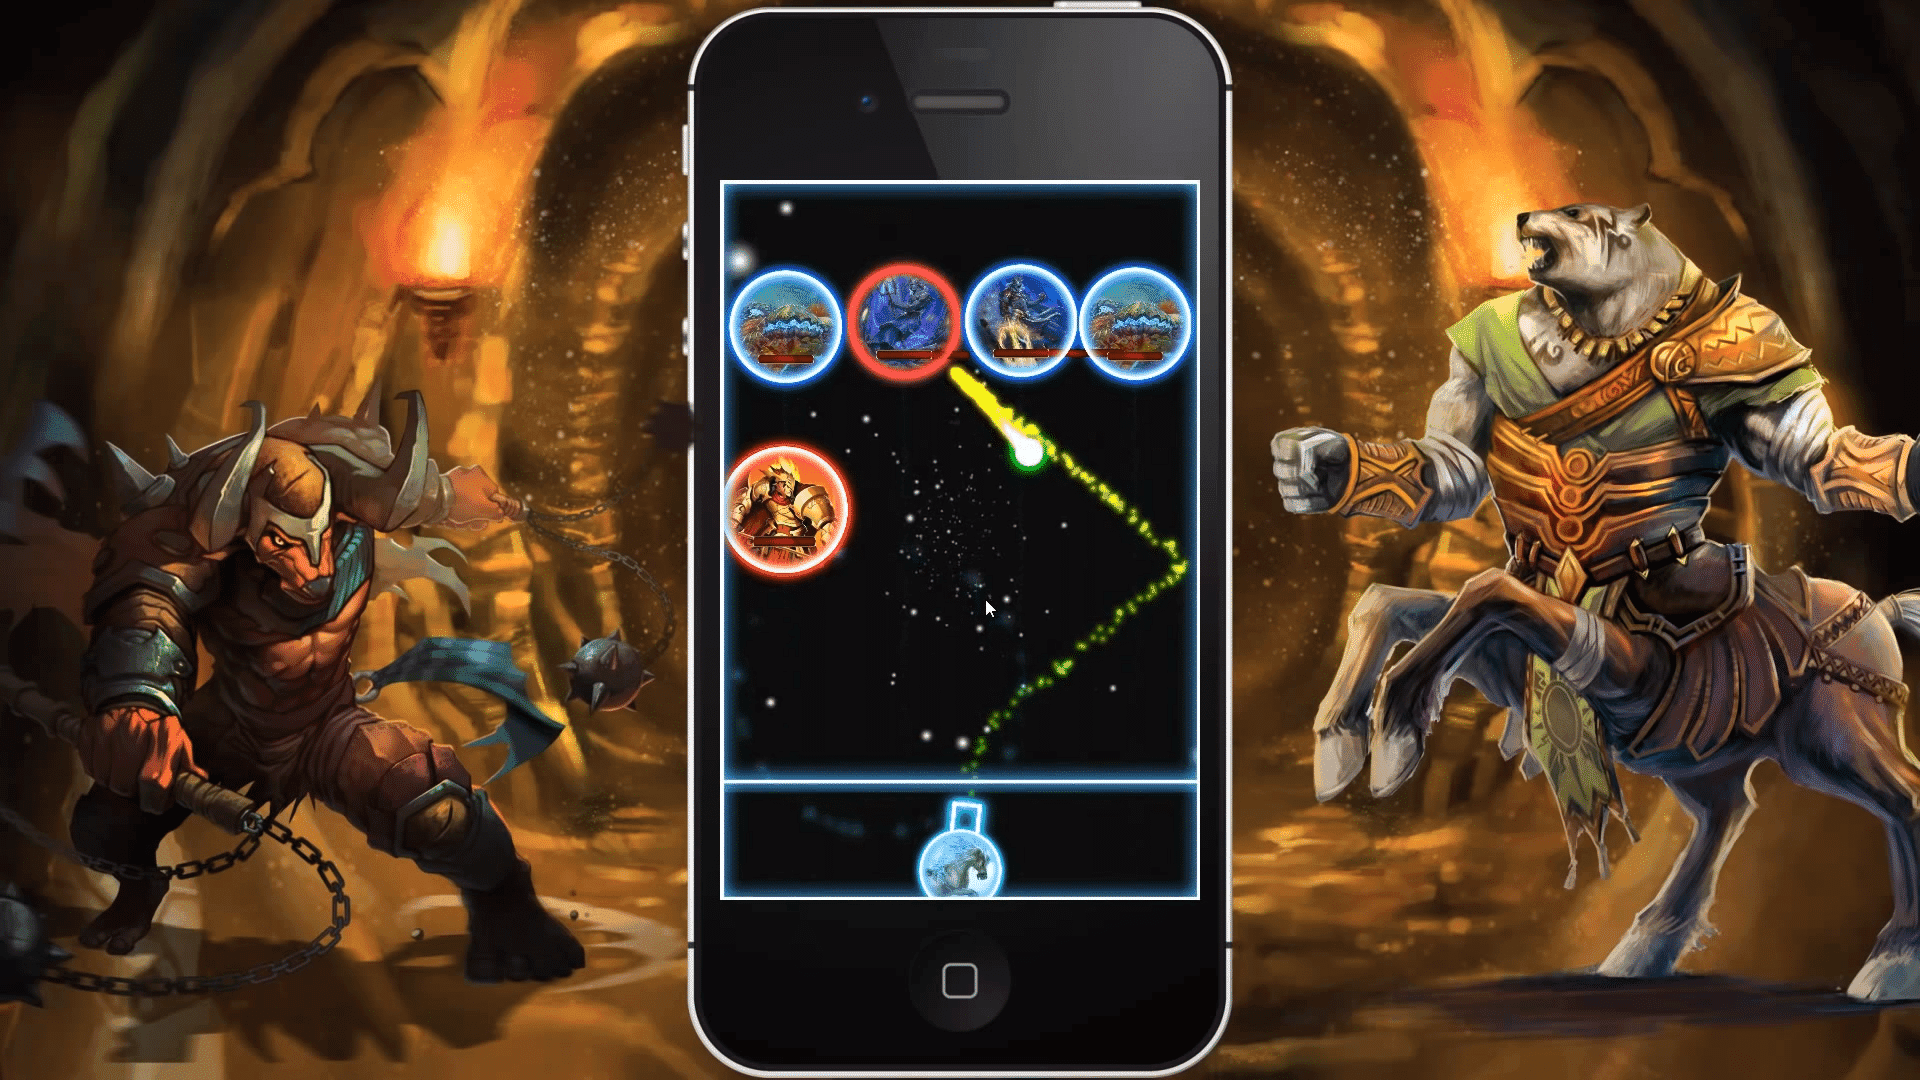 Spells of Genesis as the pioneer blockchain mobile game, fusing Trading Card Game (TCG) elements with arcade-style point-and-shoot mechanics.